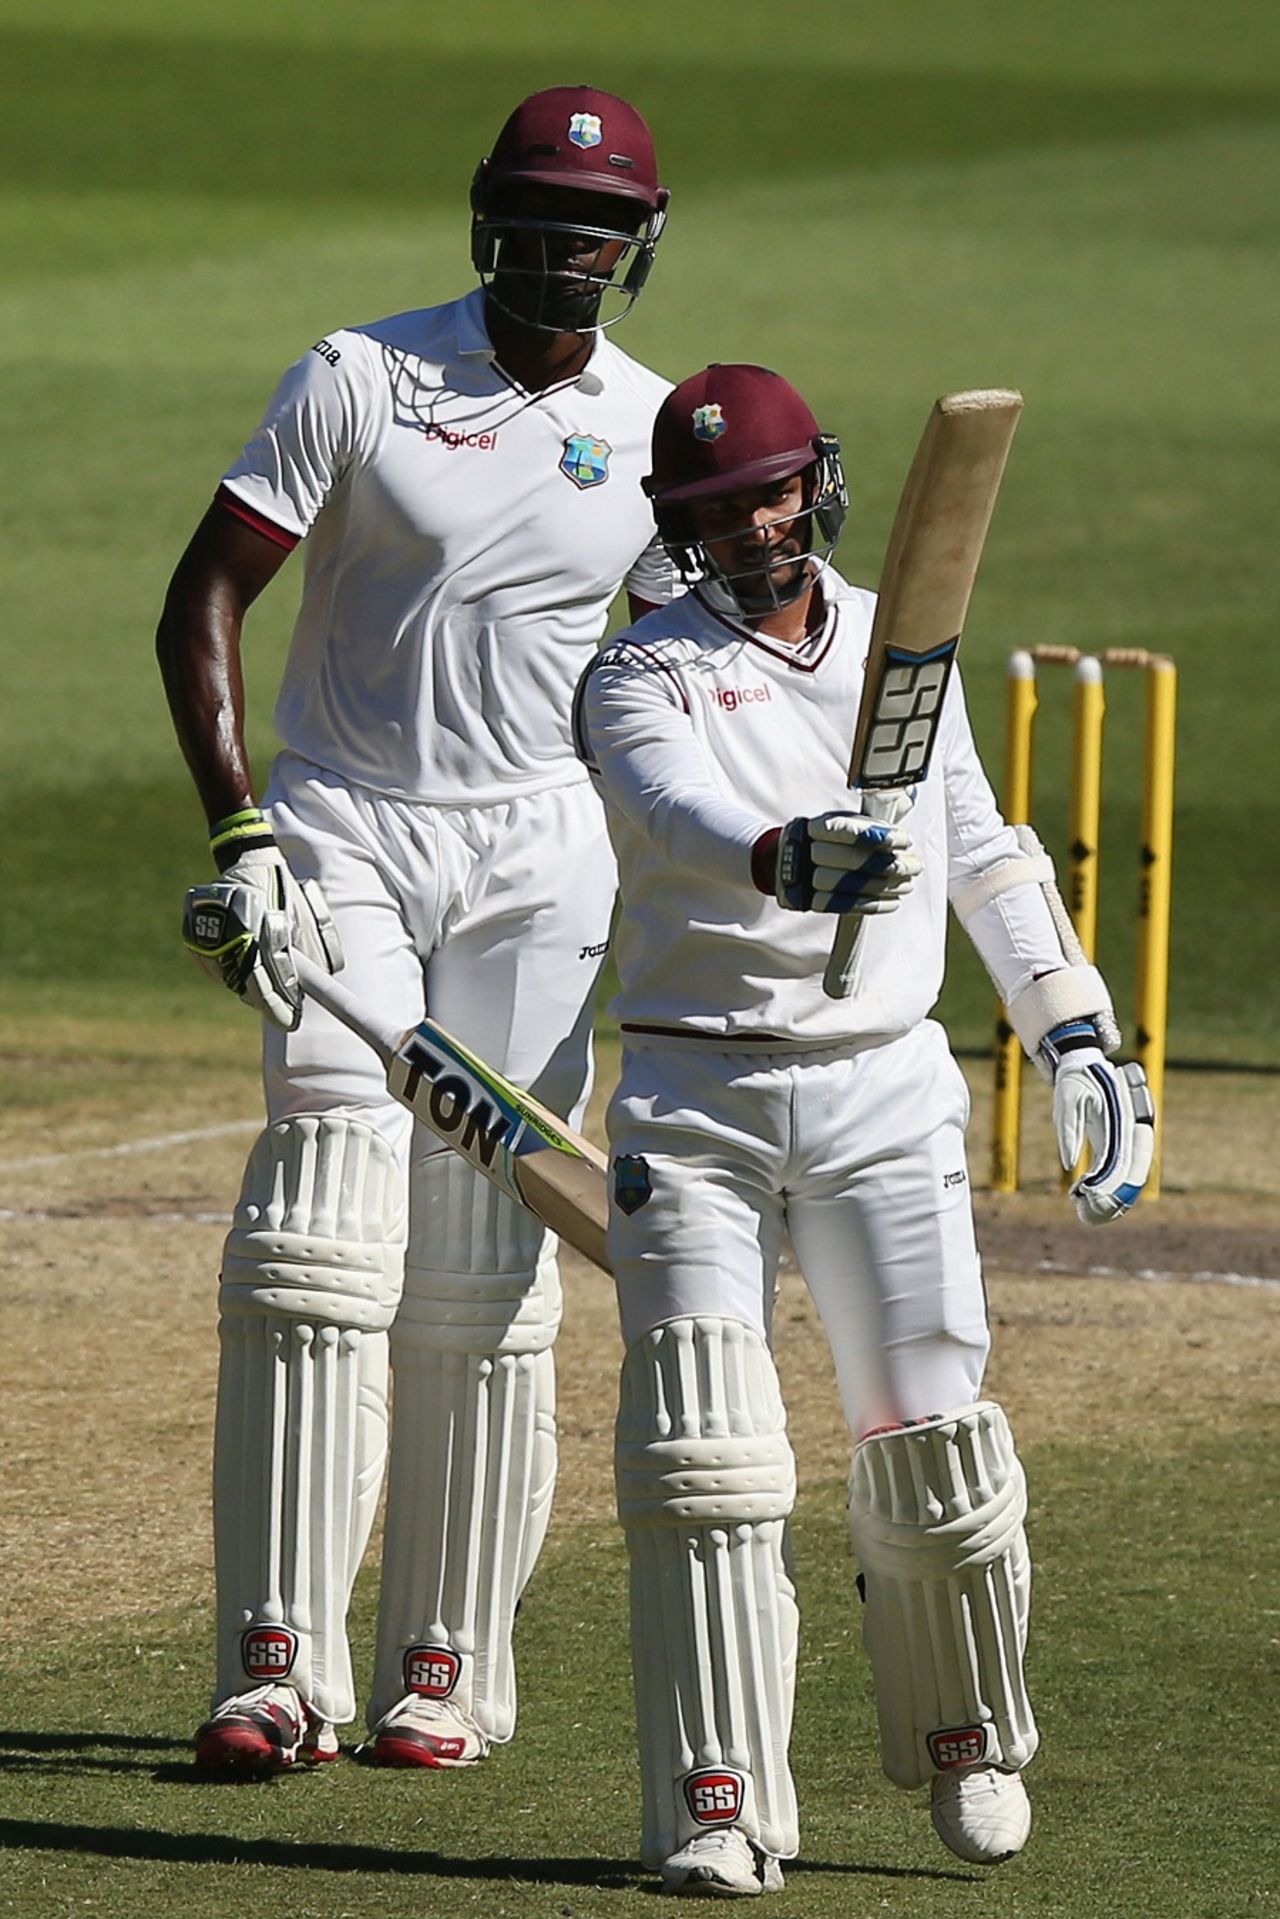 Denesh Ramdin raises his bat after reaching his fifty, Australia v West Indies, 2nd Test, Melbourne, 4th day, December 29, 2015